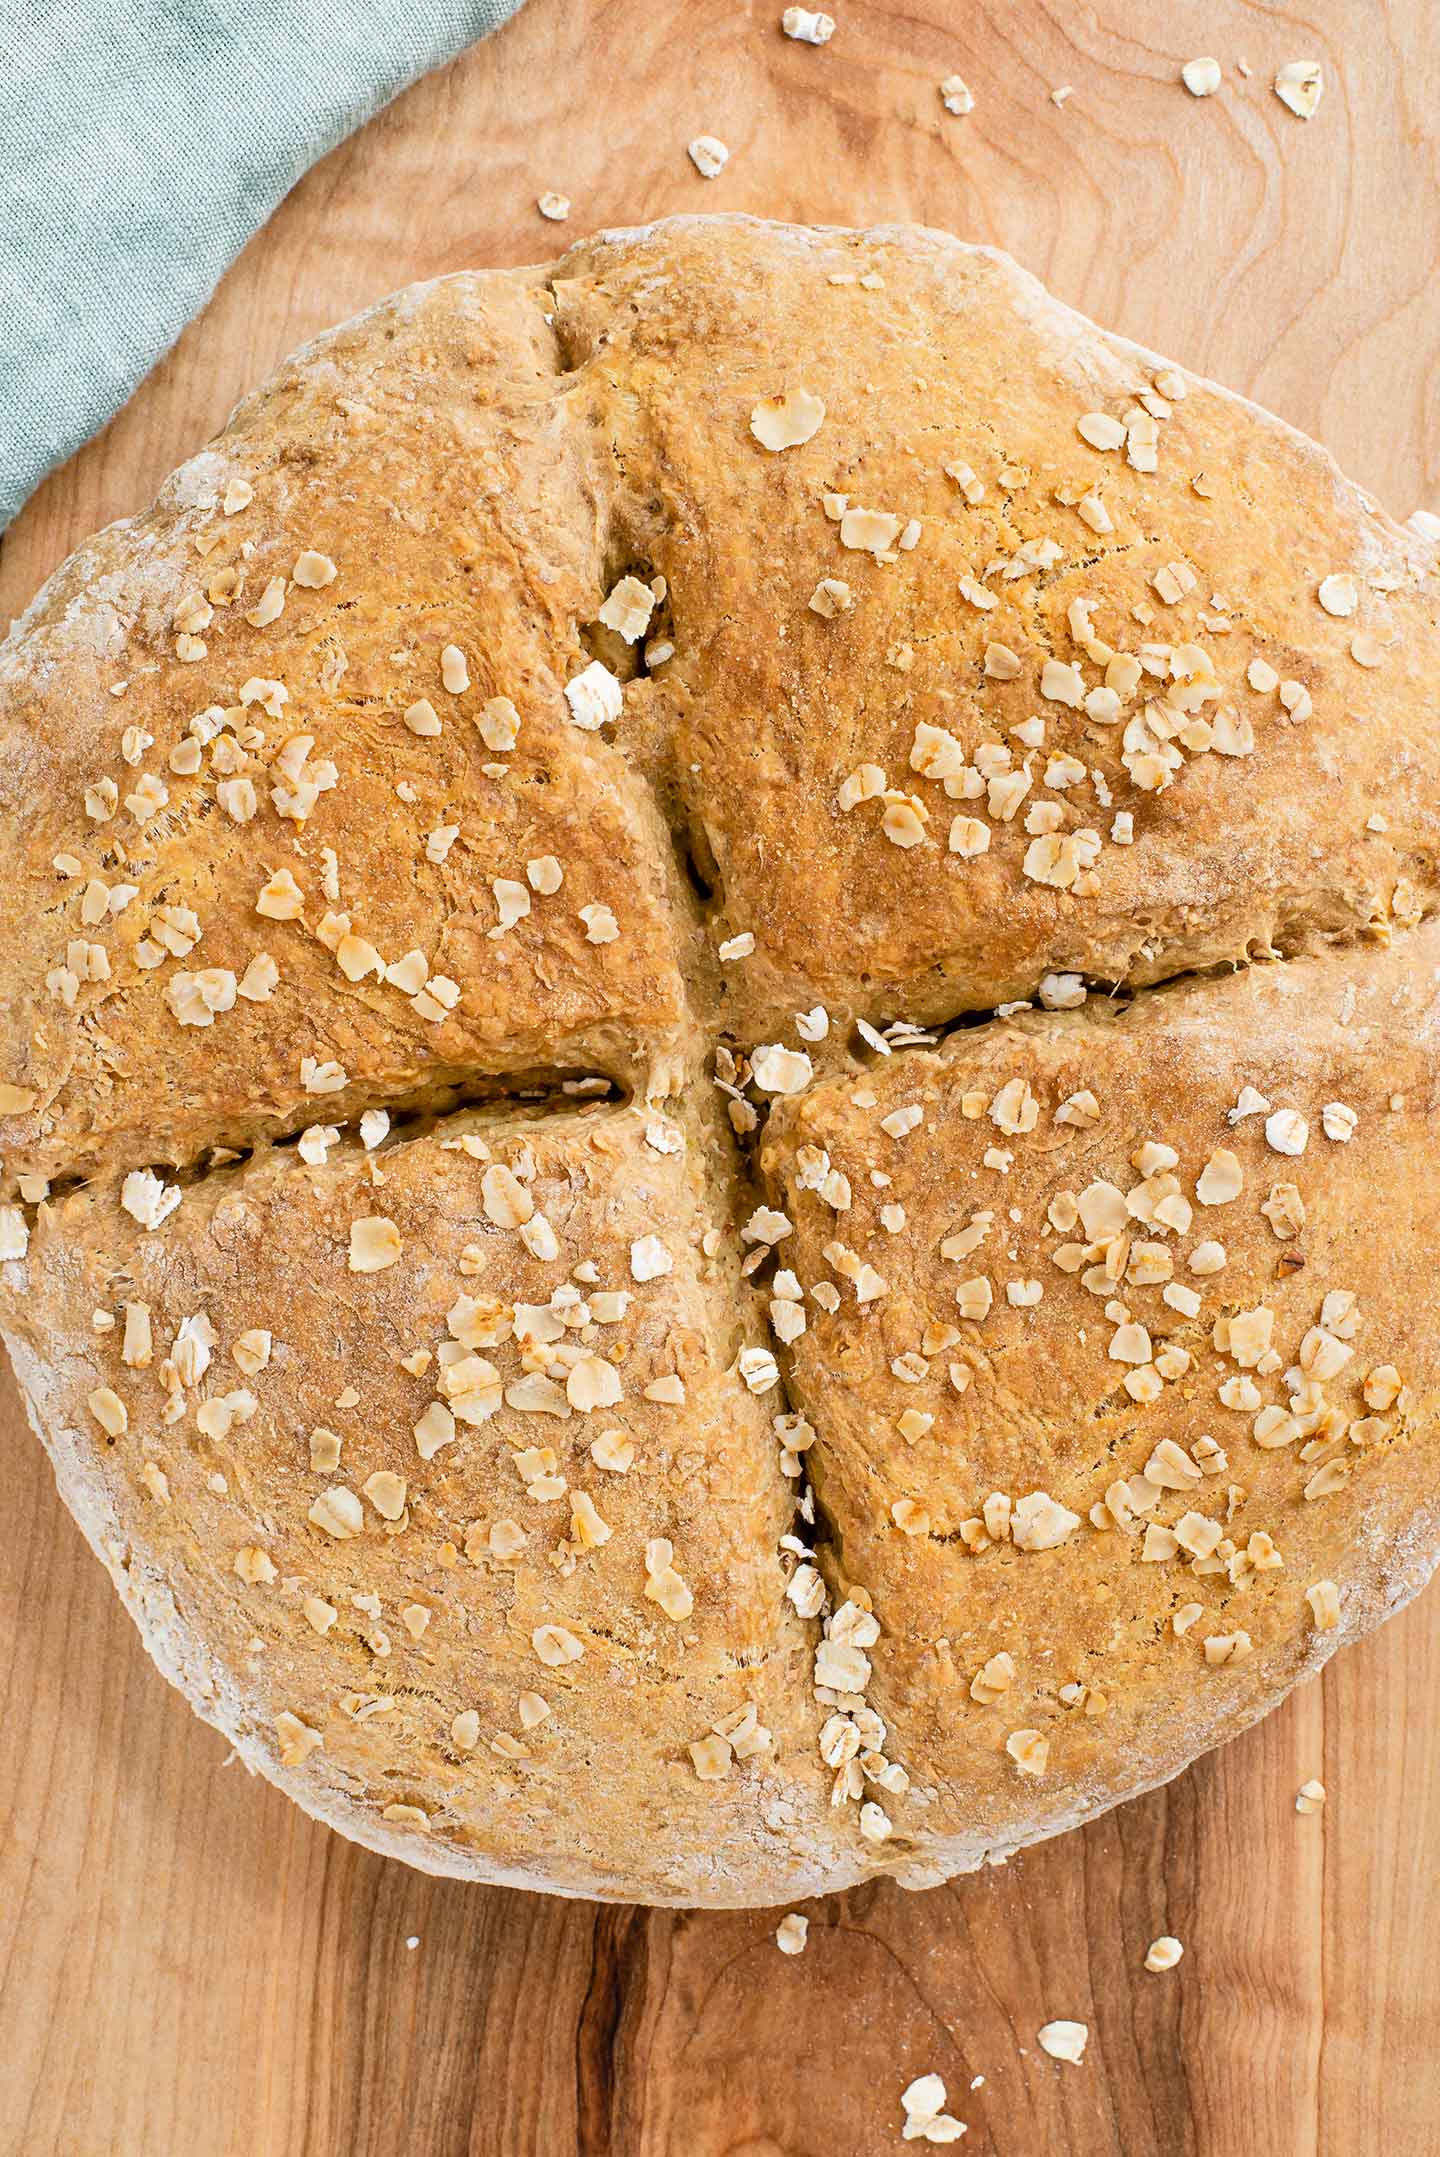 Top down view of a round vegan Irish soda bread loaf with a deep cross. The loaf is sprinkled with oats.